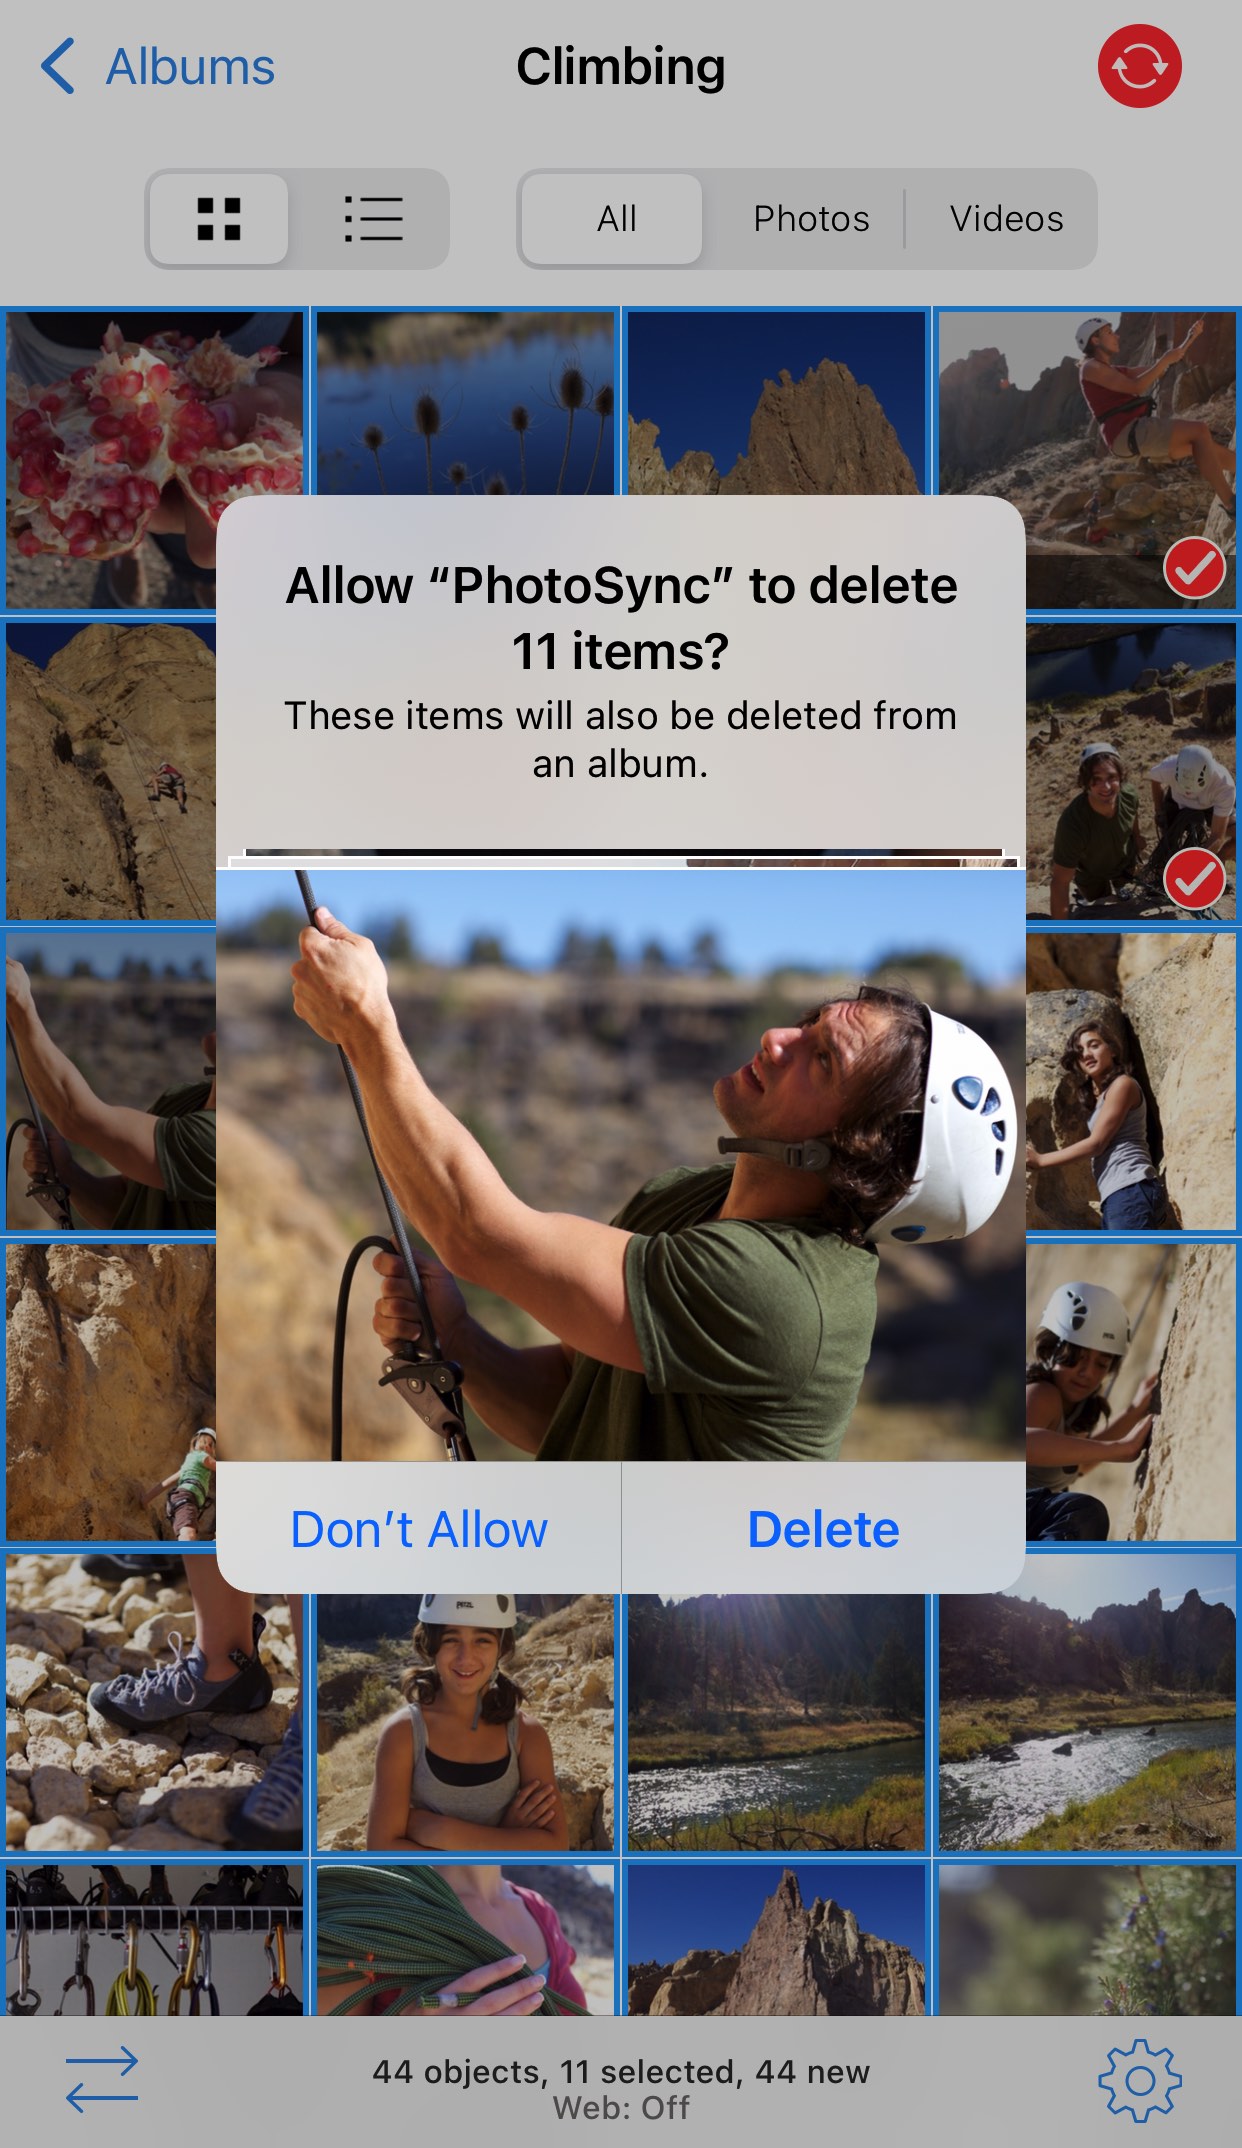 Confirmation prompt to delete selected photos